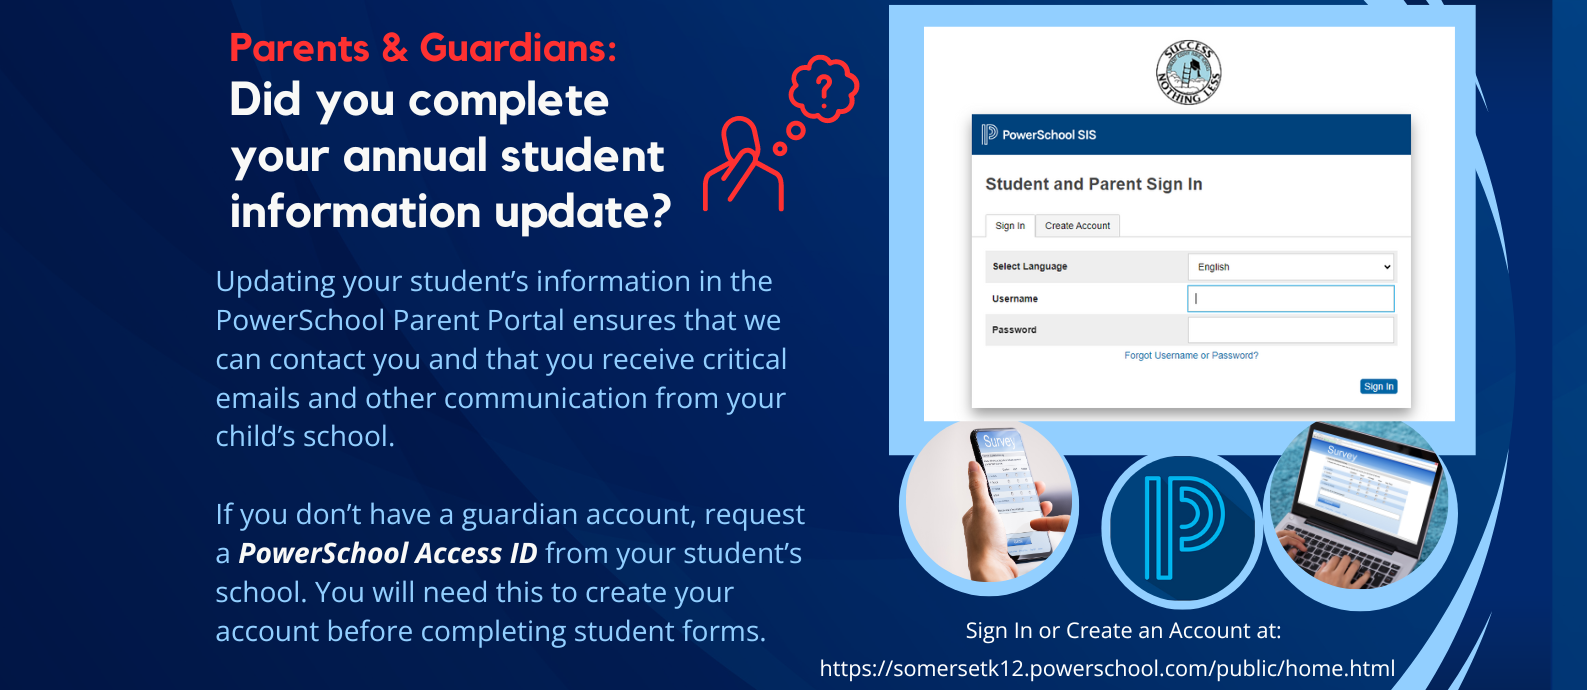 please update your forms in the power school parent portal